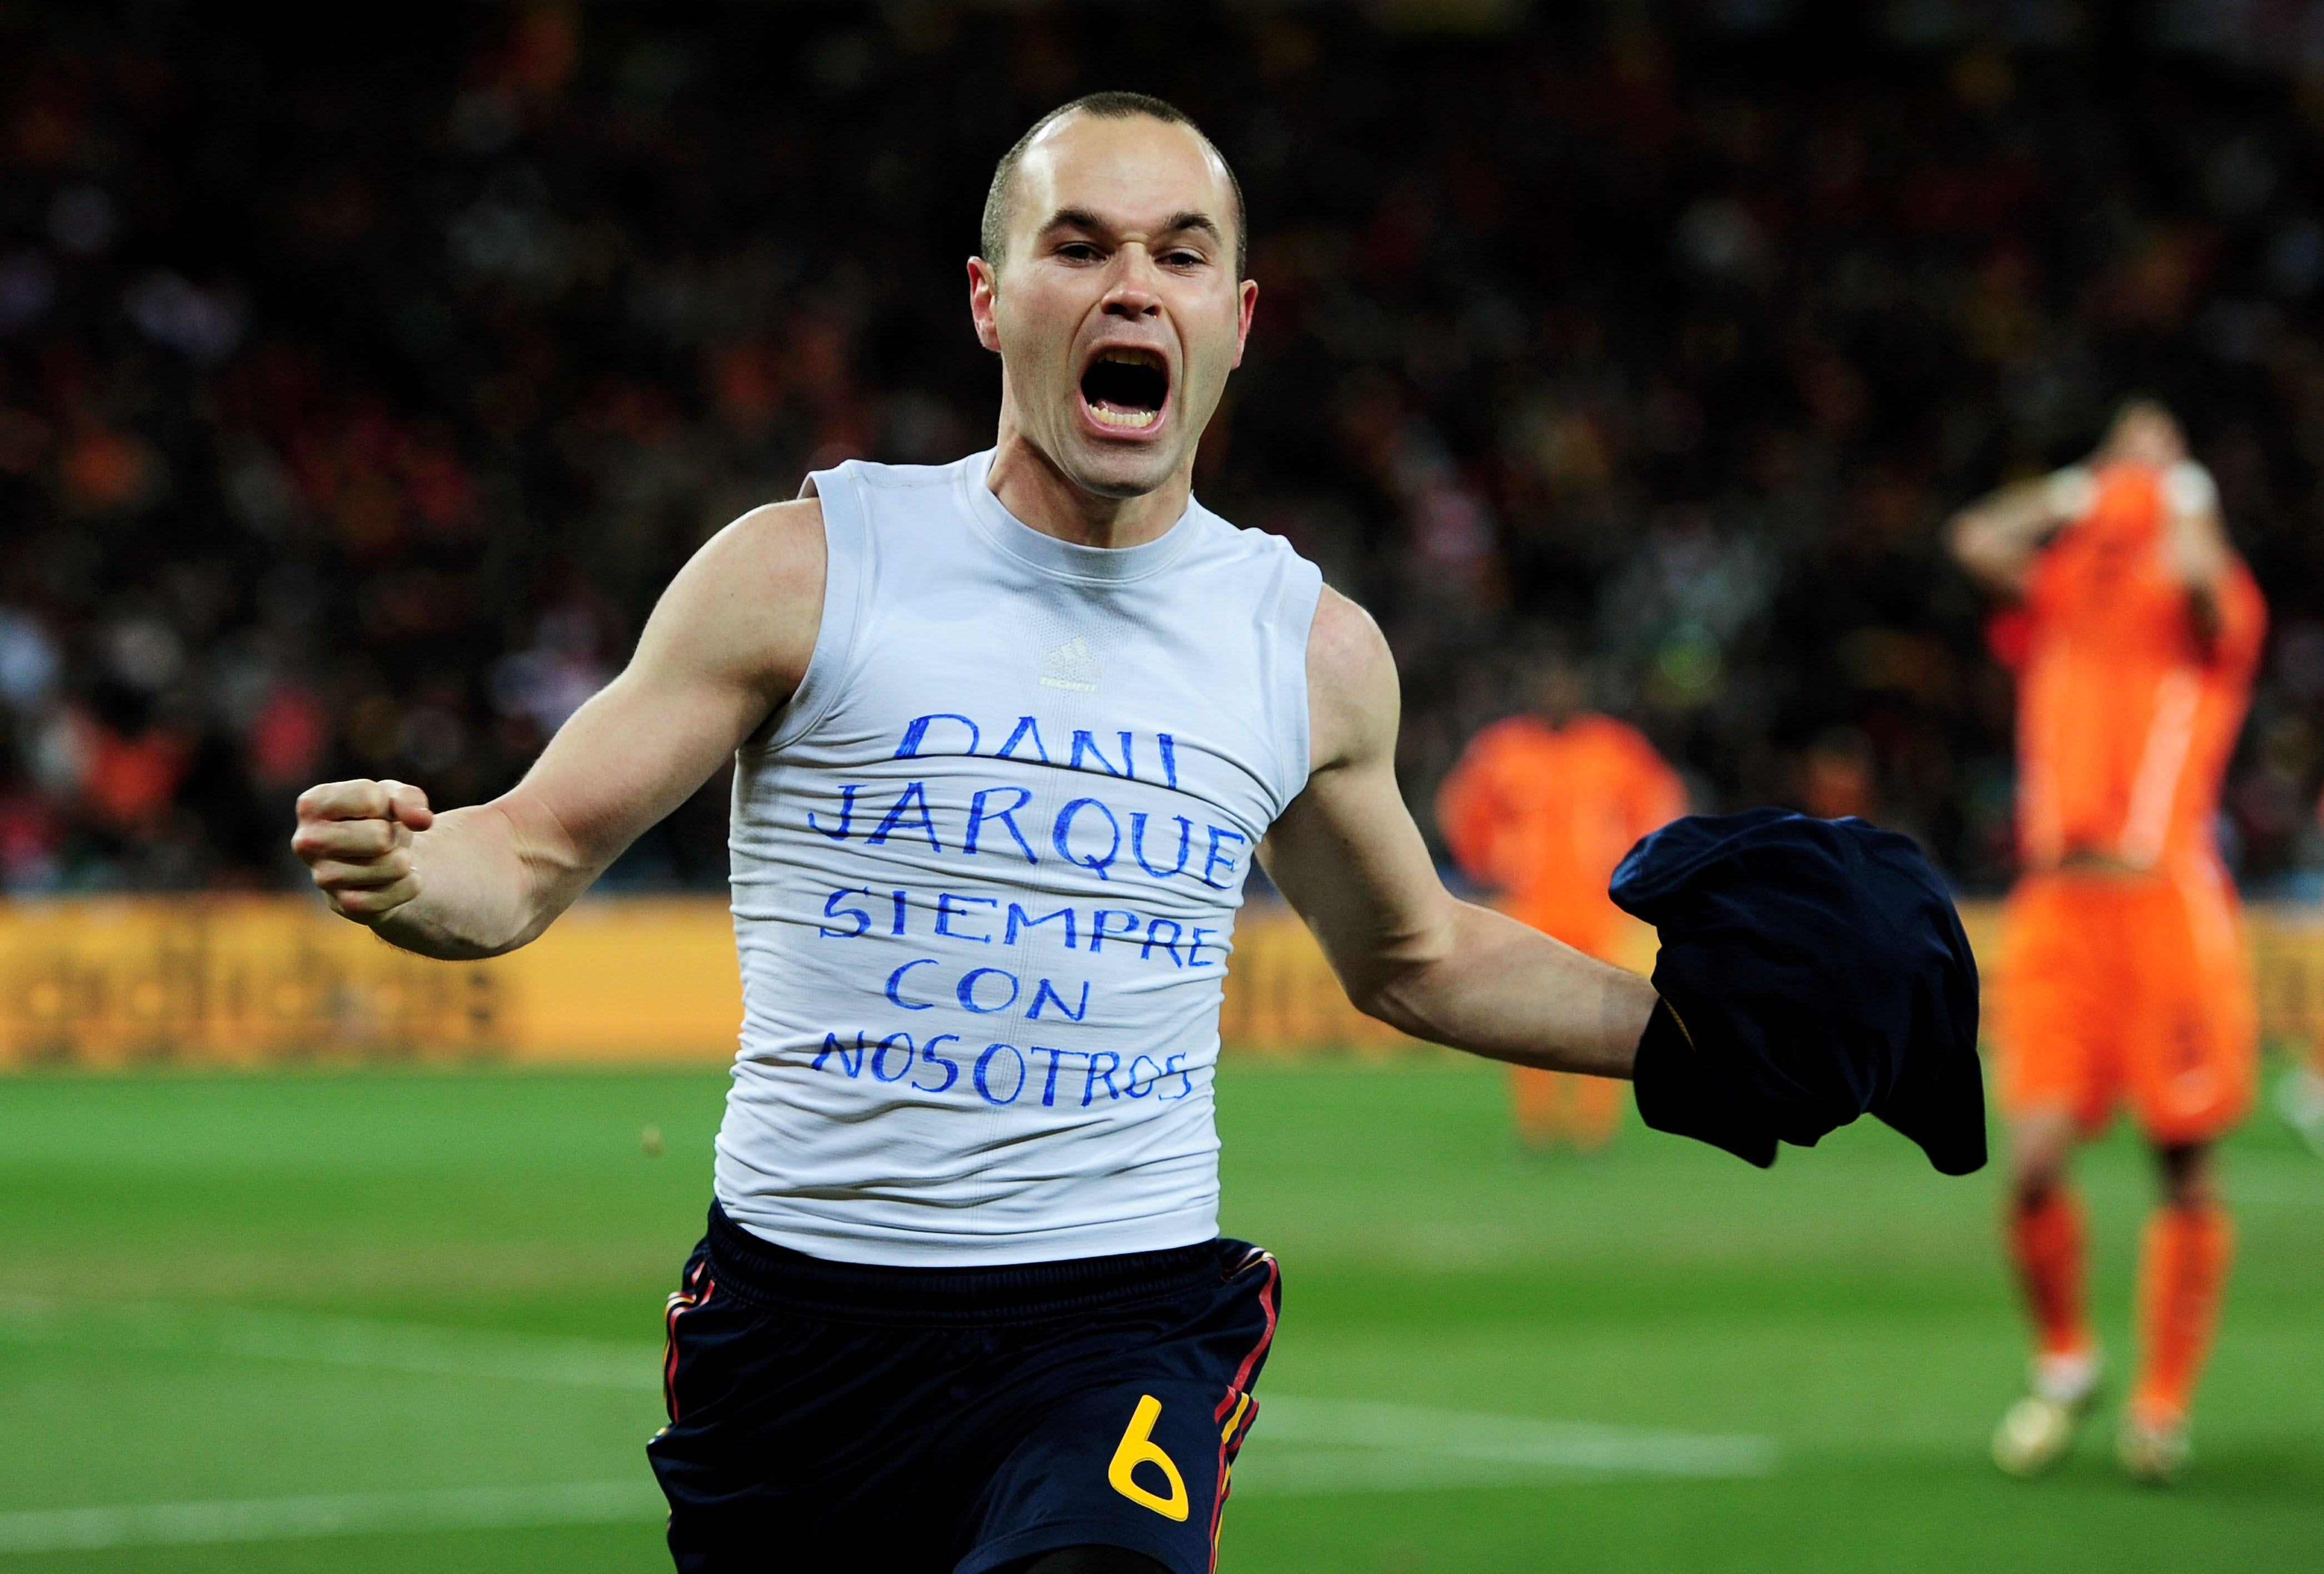 Andres Iniesta’s tribute to Dani Jarque saved the World Cup and has